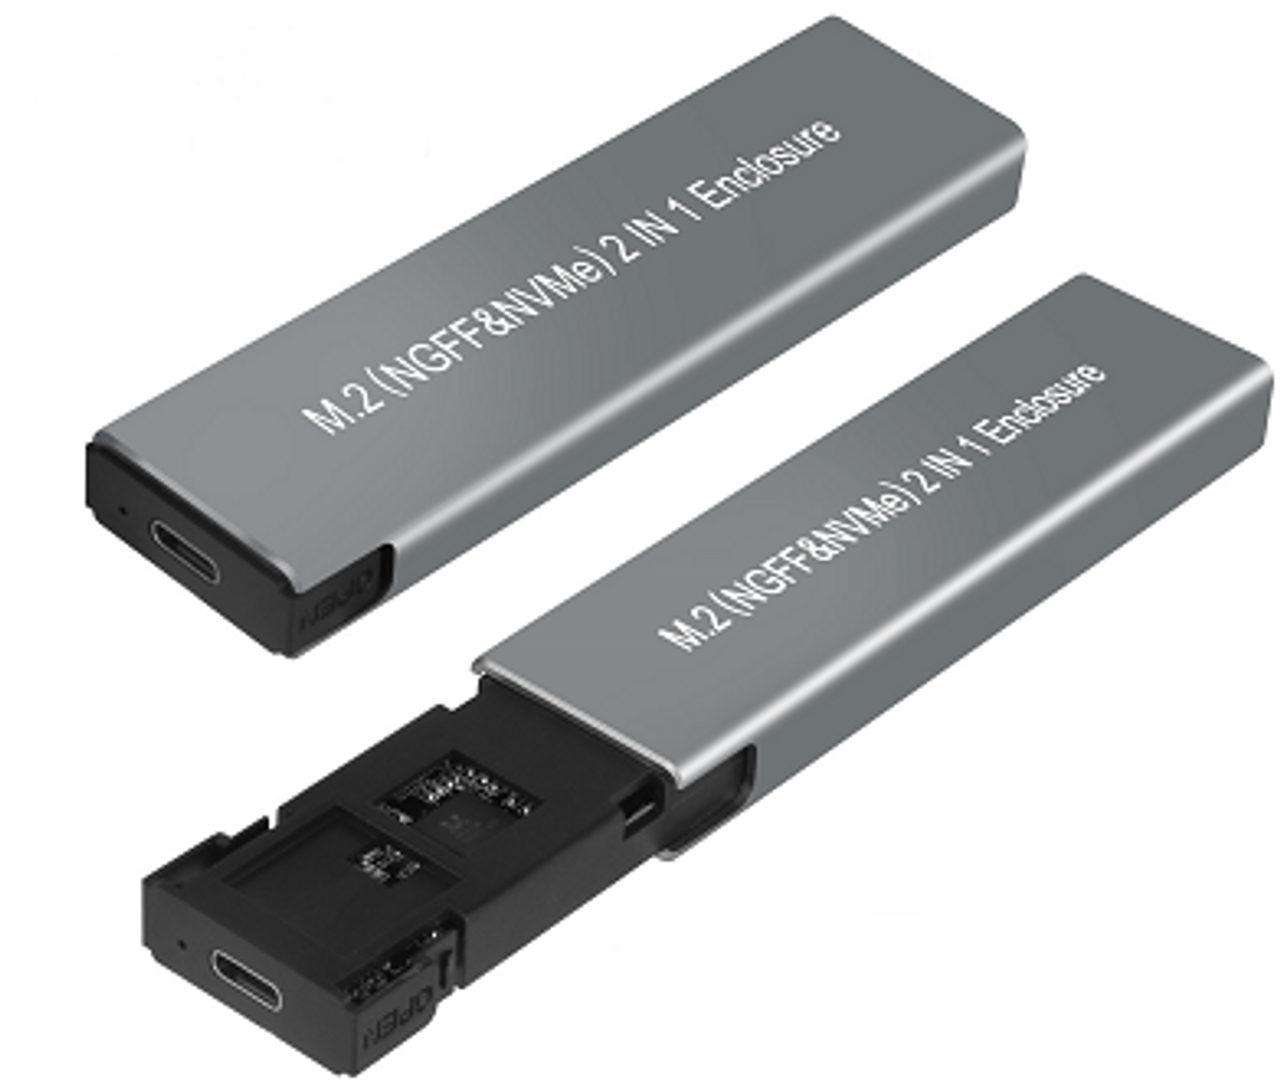 Buy UGREEN 10902, M.2 NVMe SSD Enclosure Adapter 10Gbps USB C 3.1